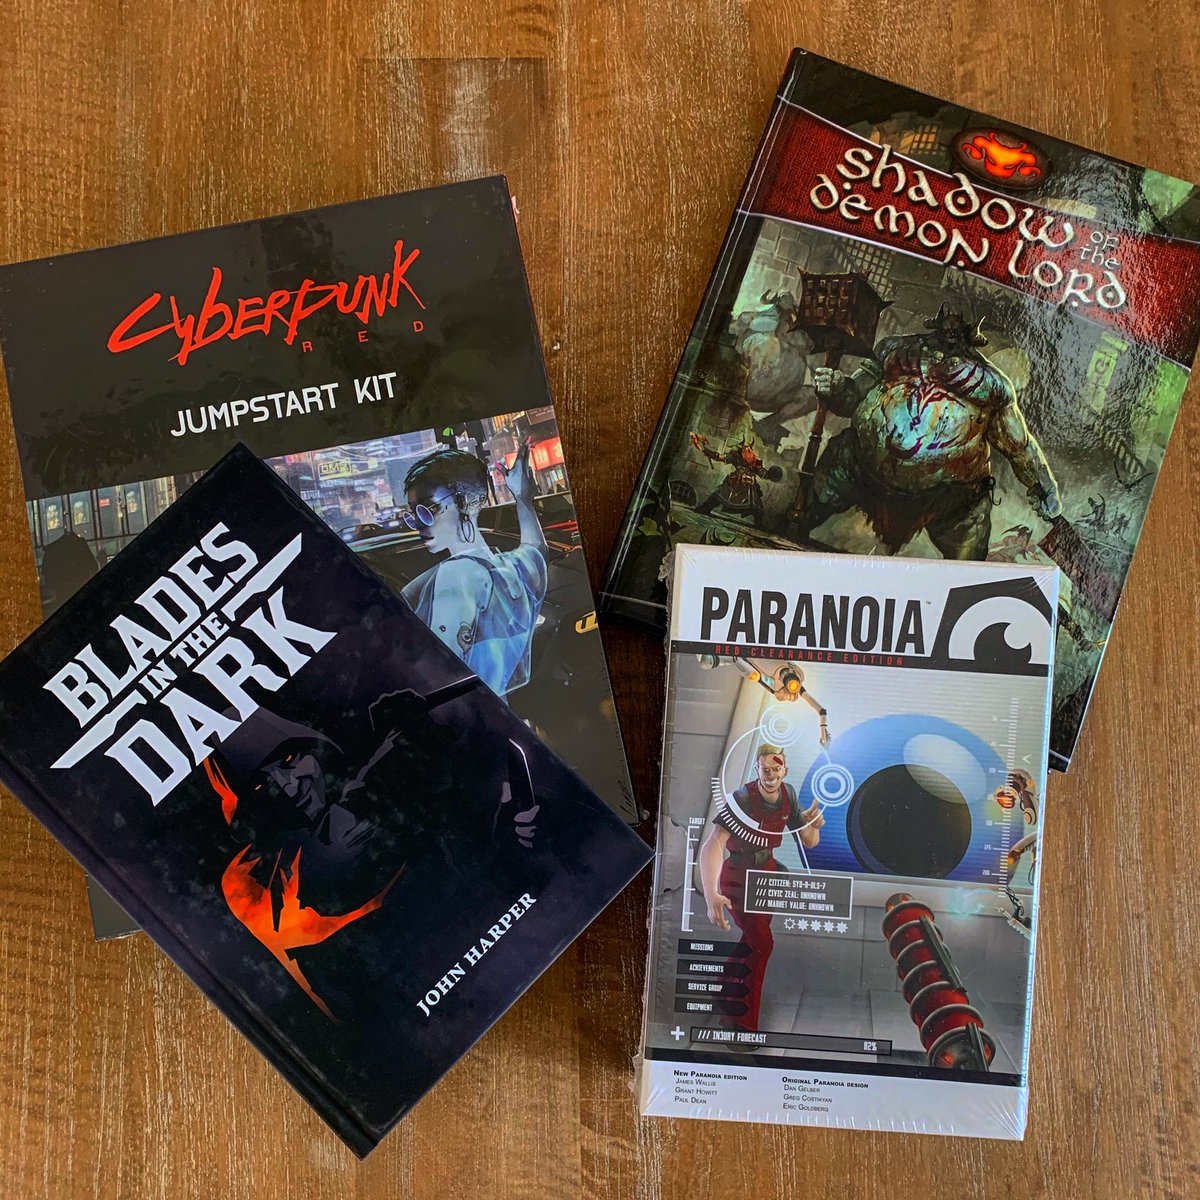 Solid mail delivery today. #cyberpunkred #bladesinthedark #shadowofthedemonlord #paranoiarpg